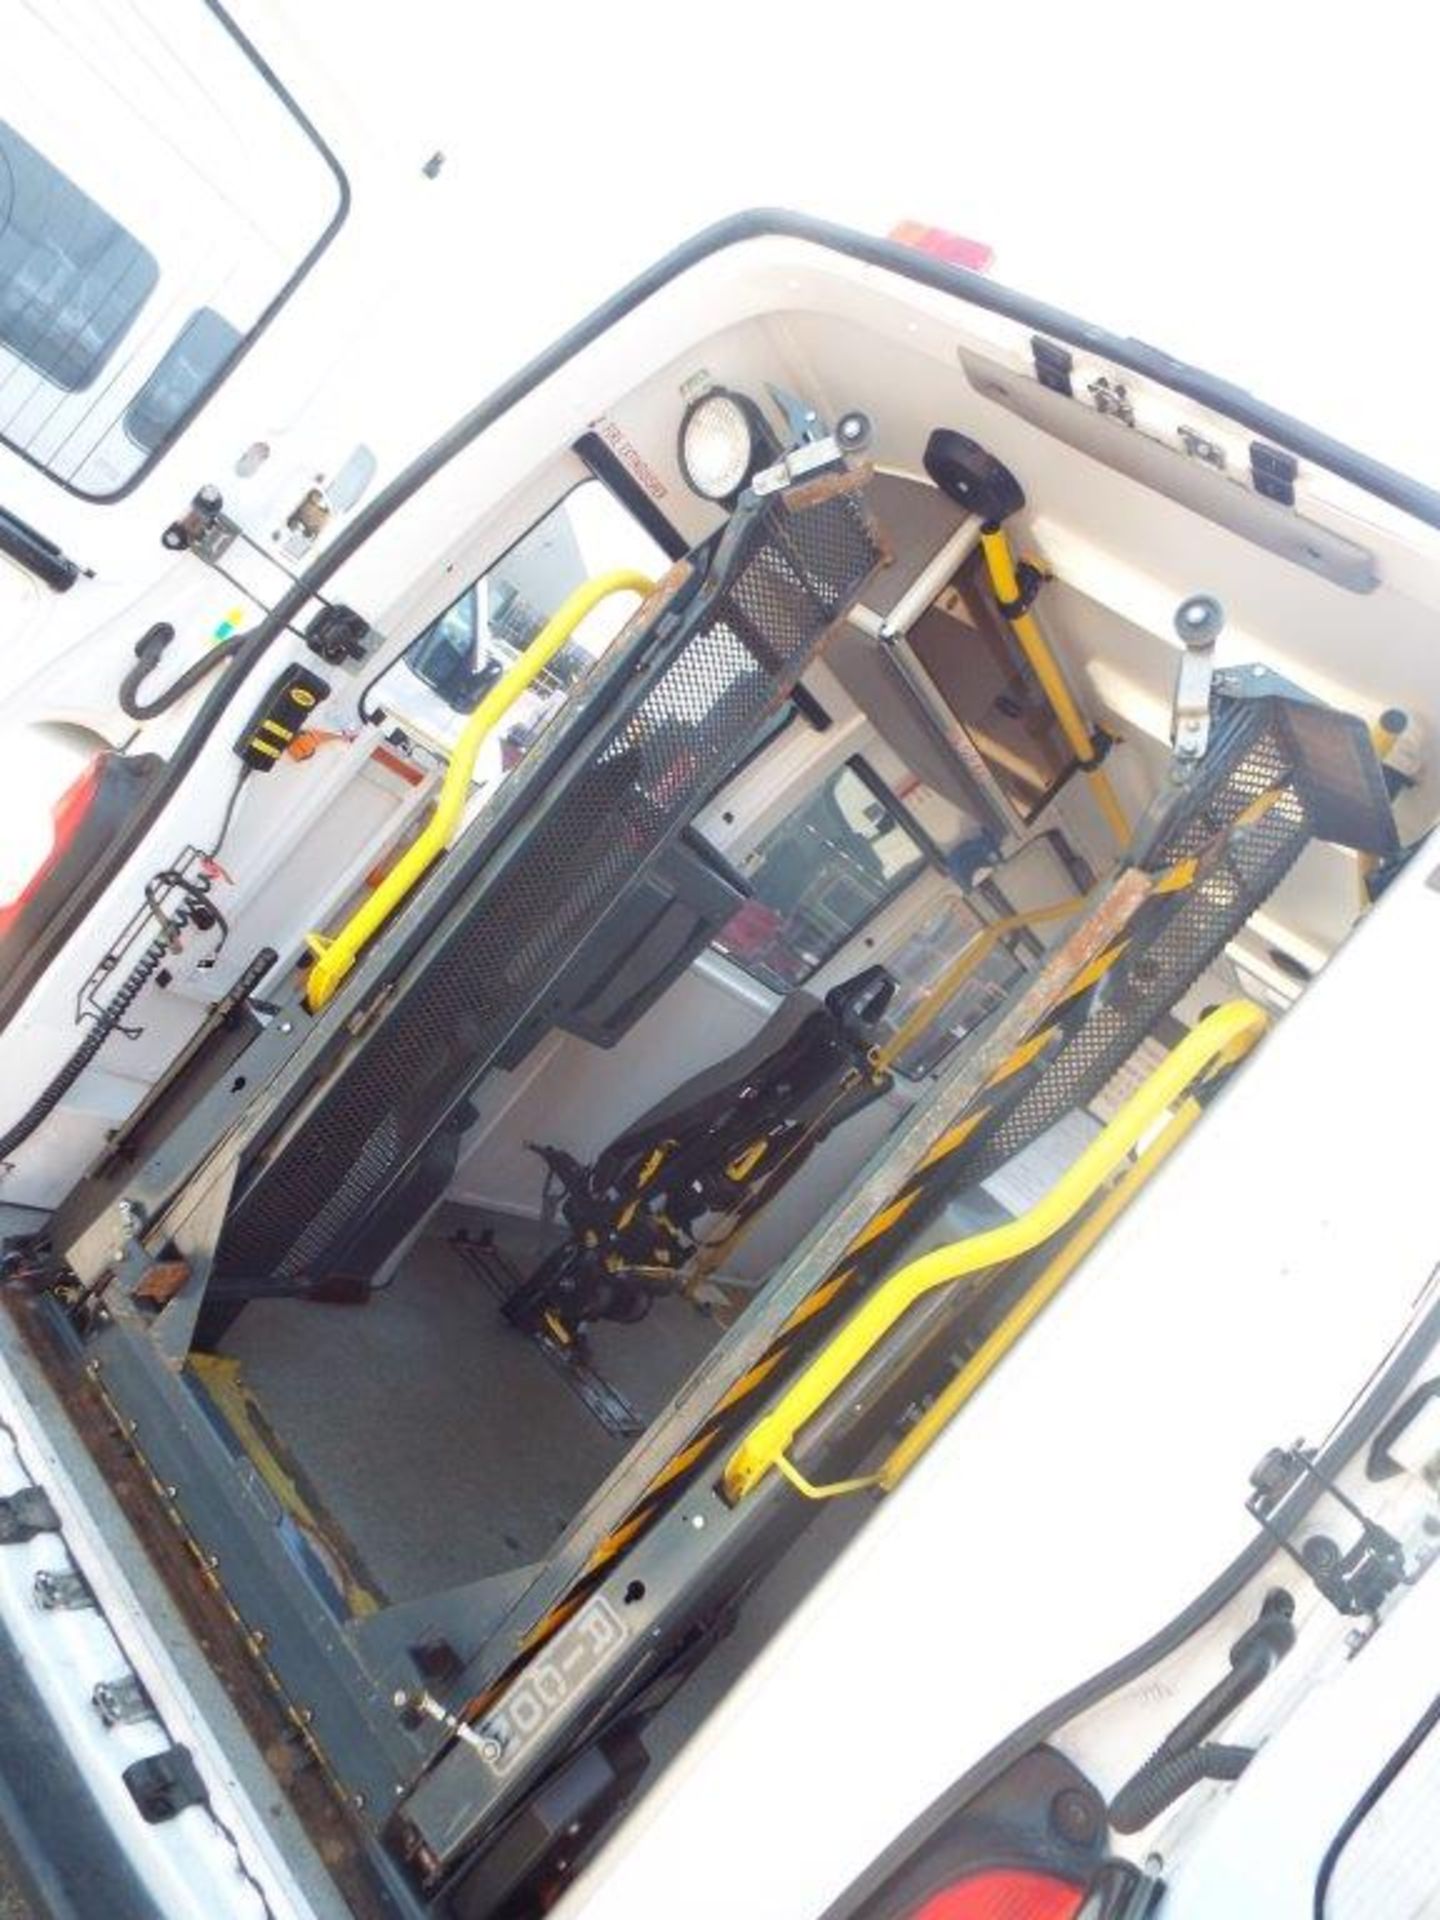 Renault Master 2.5 DCI Patient Transfer Bus with Ricon 350KG Tail Lift - Image 19 of 29